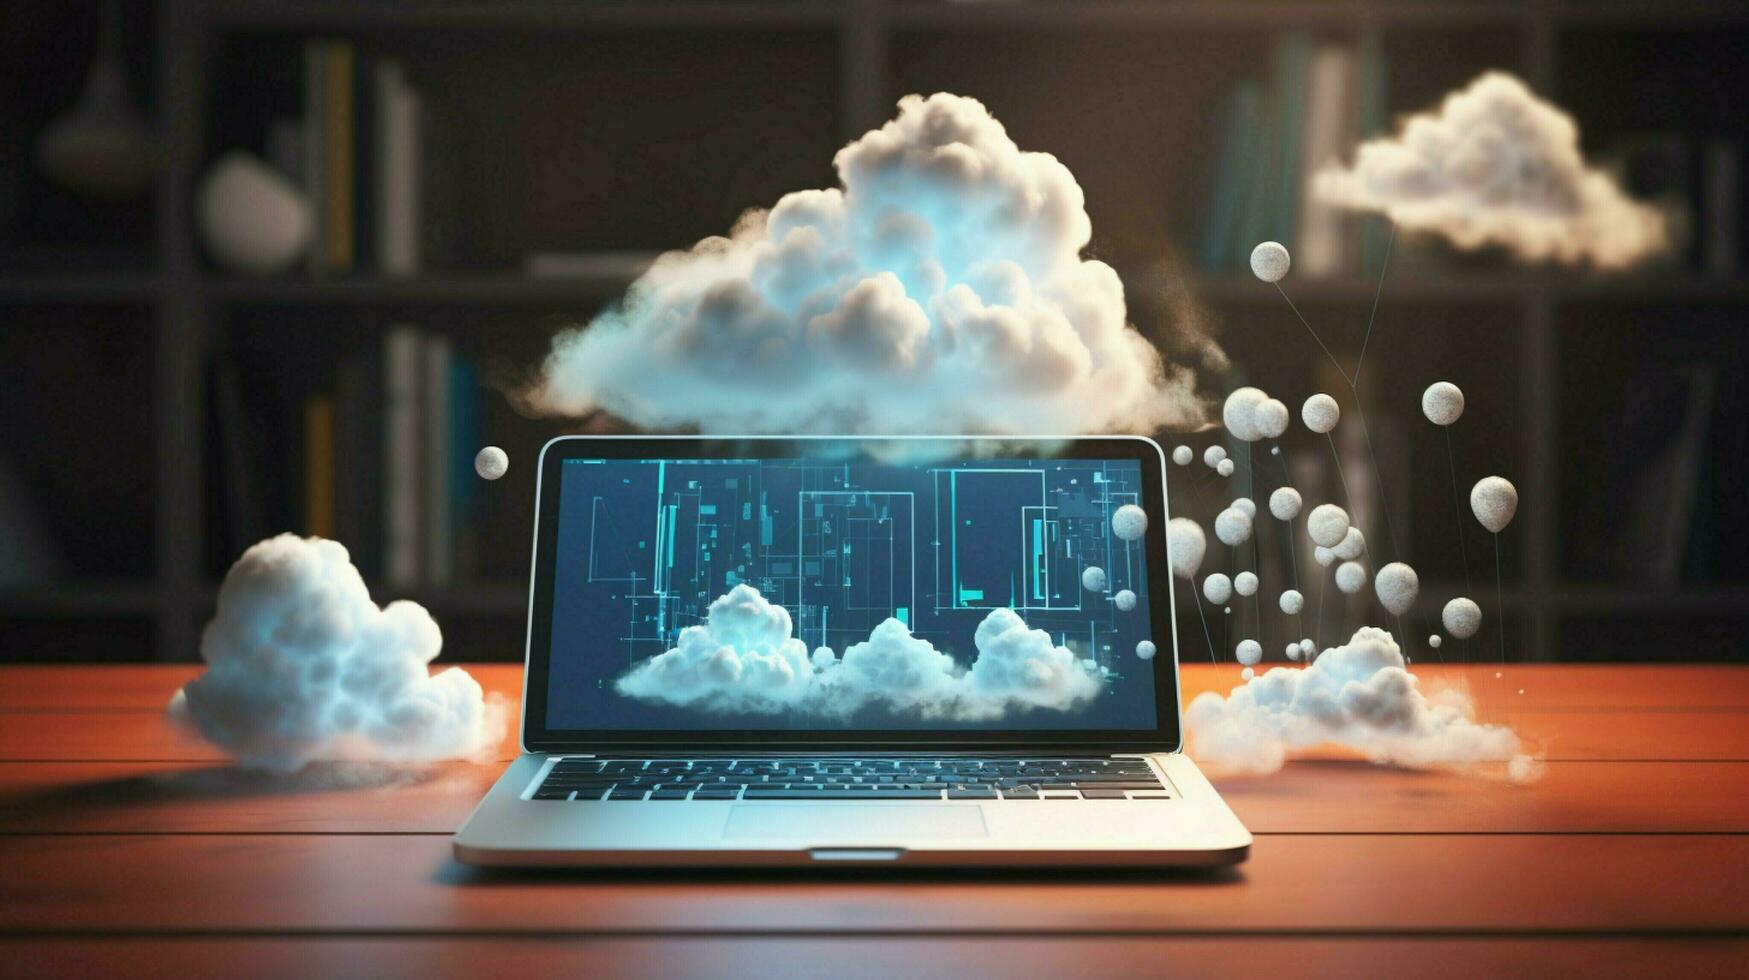 smartphone and laptop communicate wirelessly over cloud photo